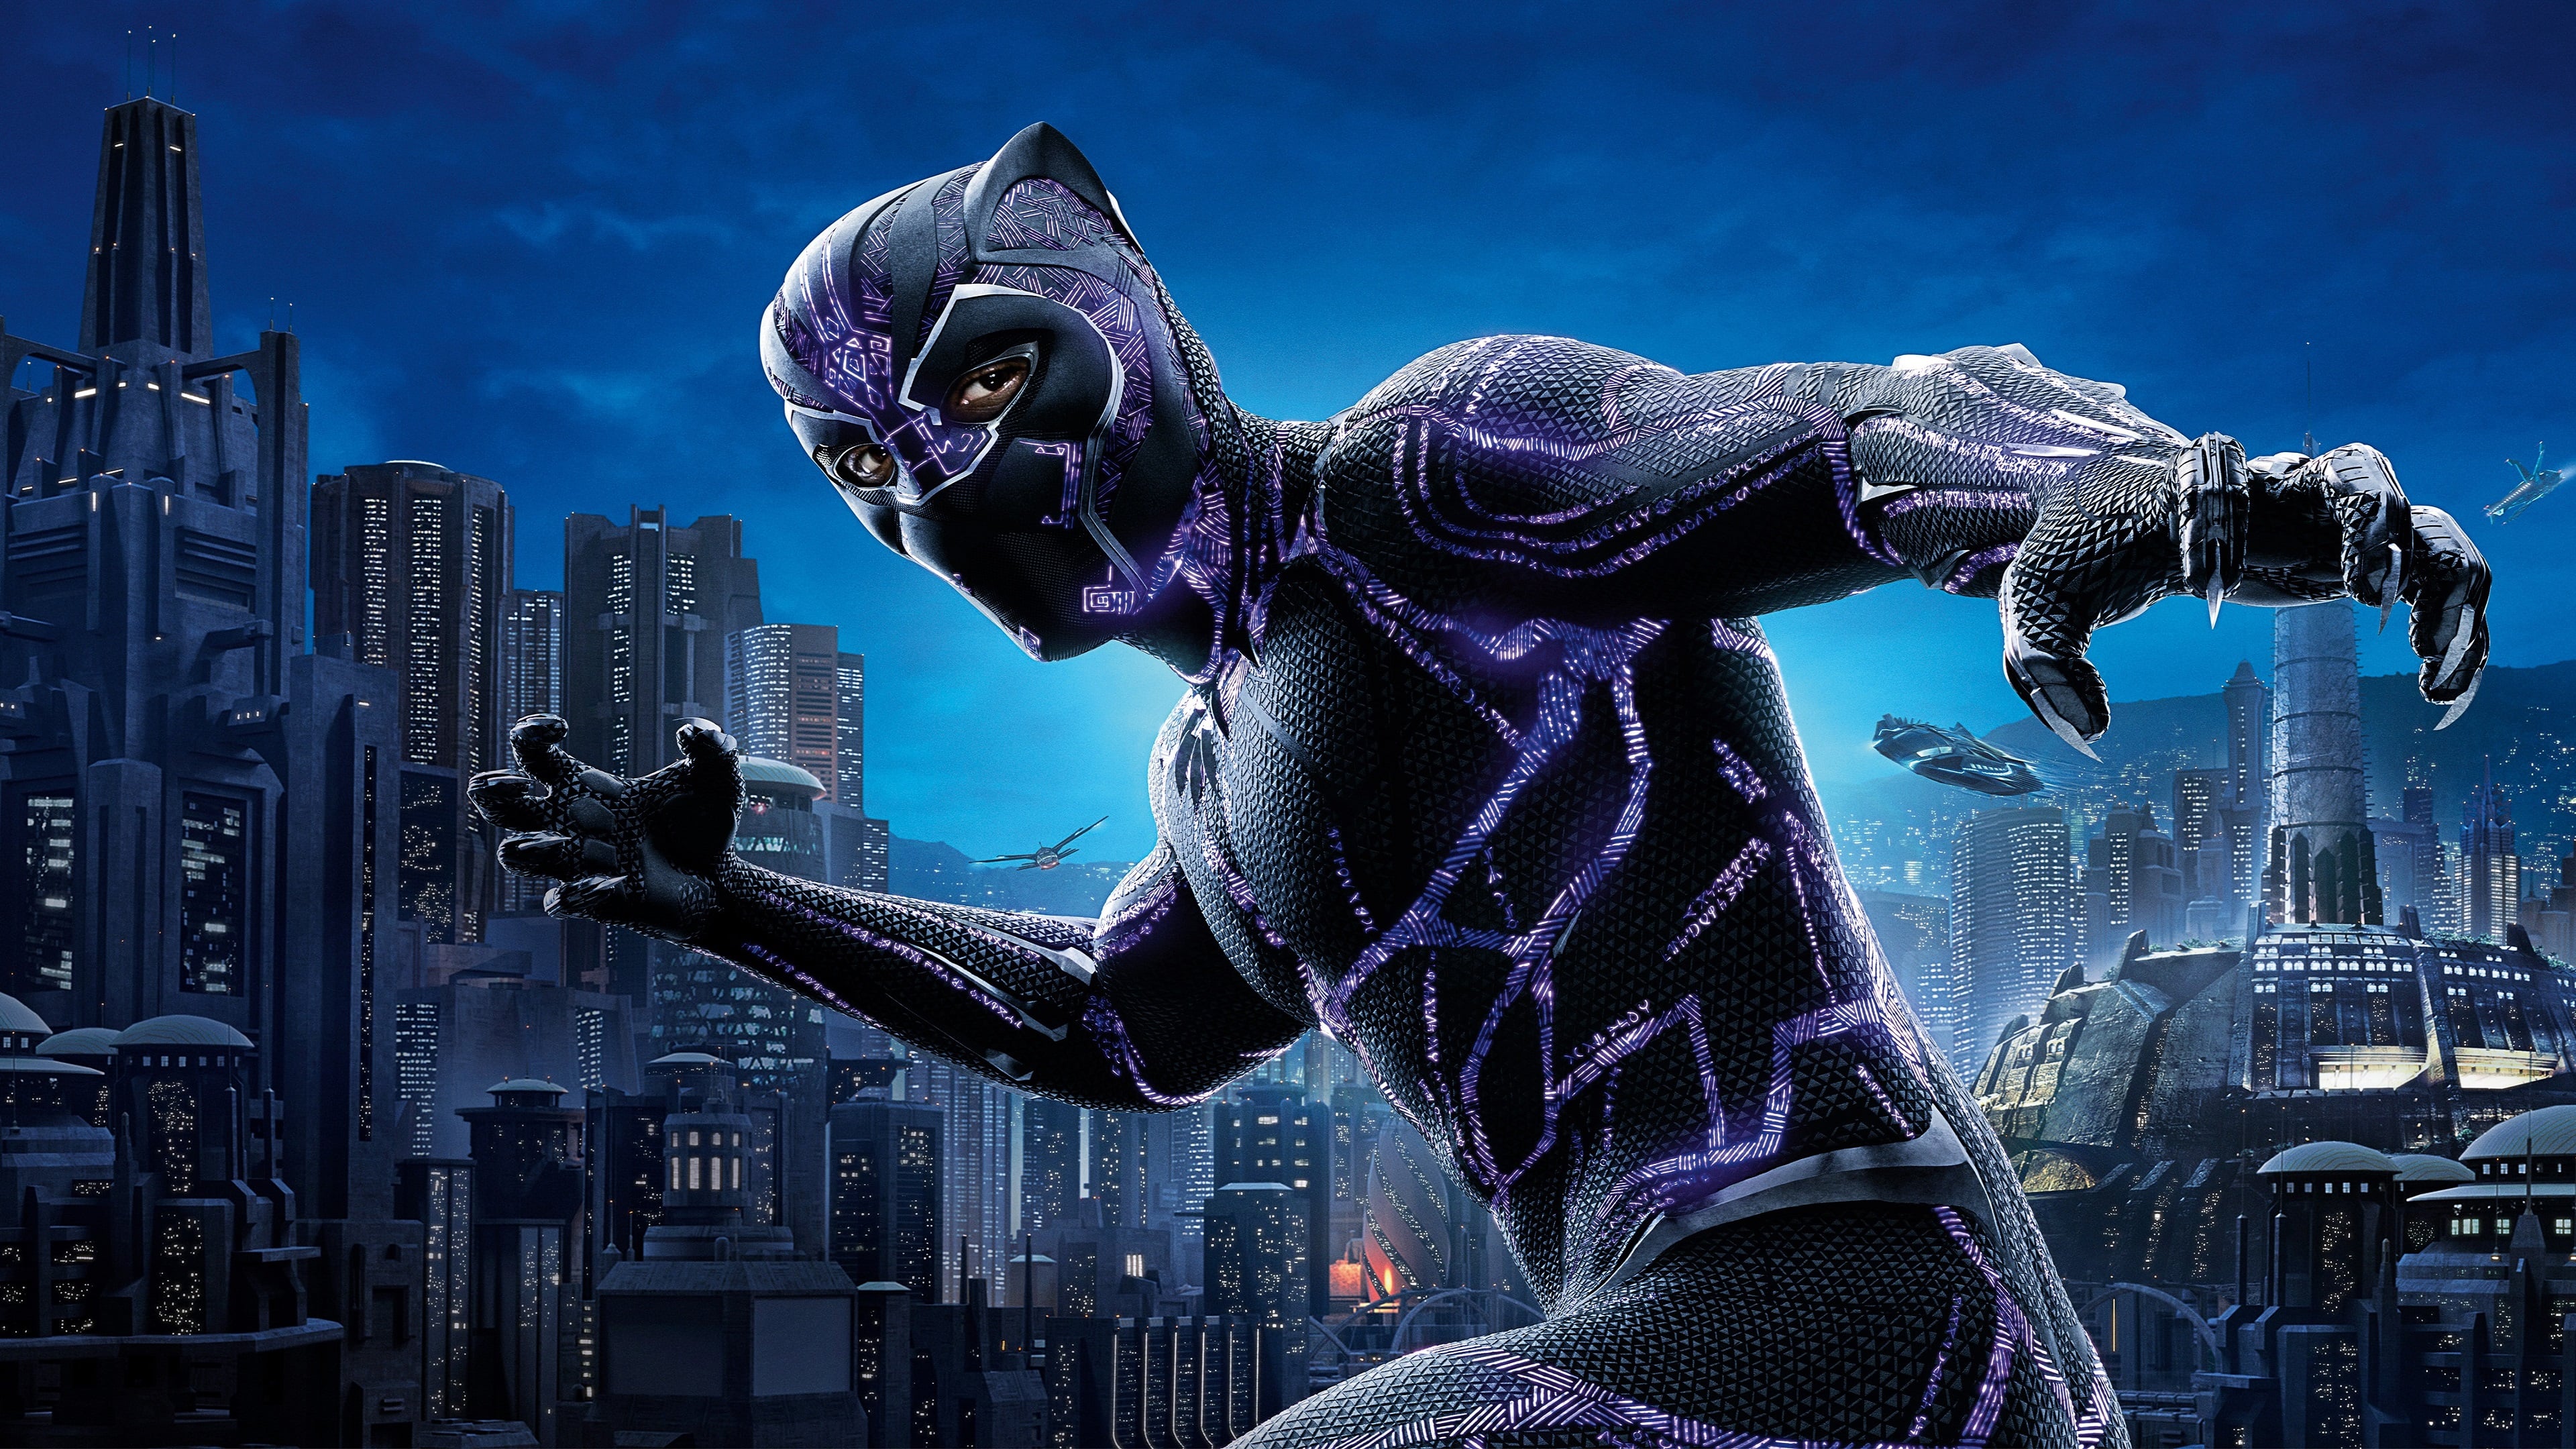 black panther full movie free download in tamil dubbed download